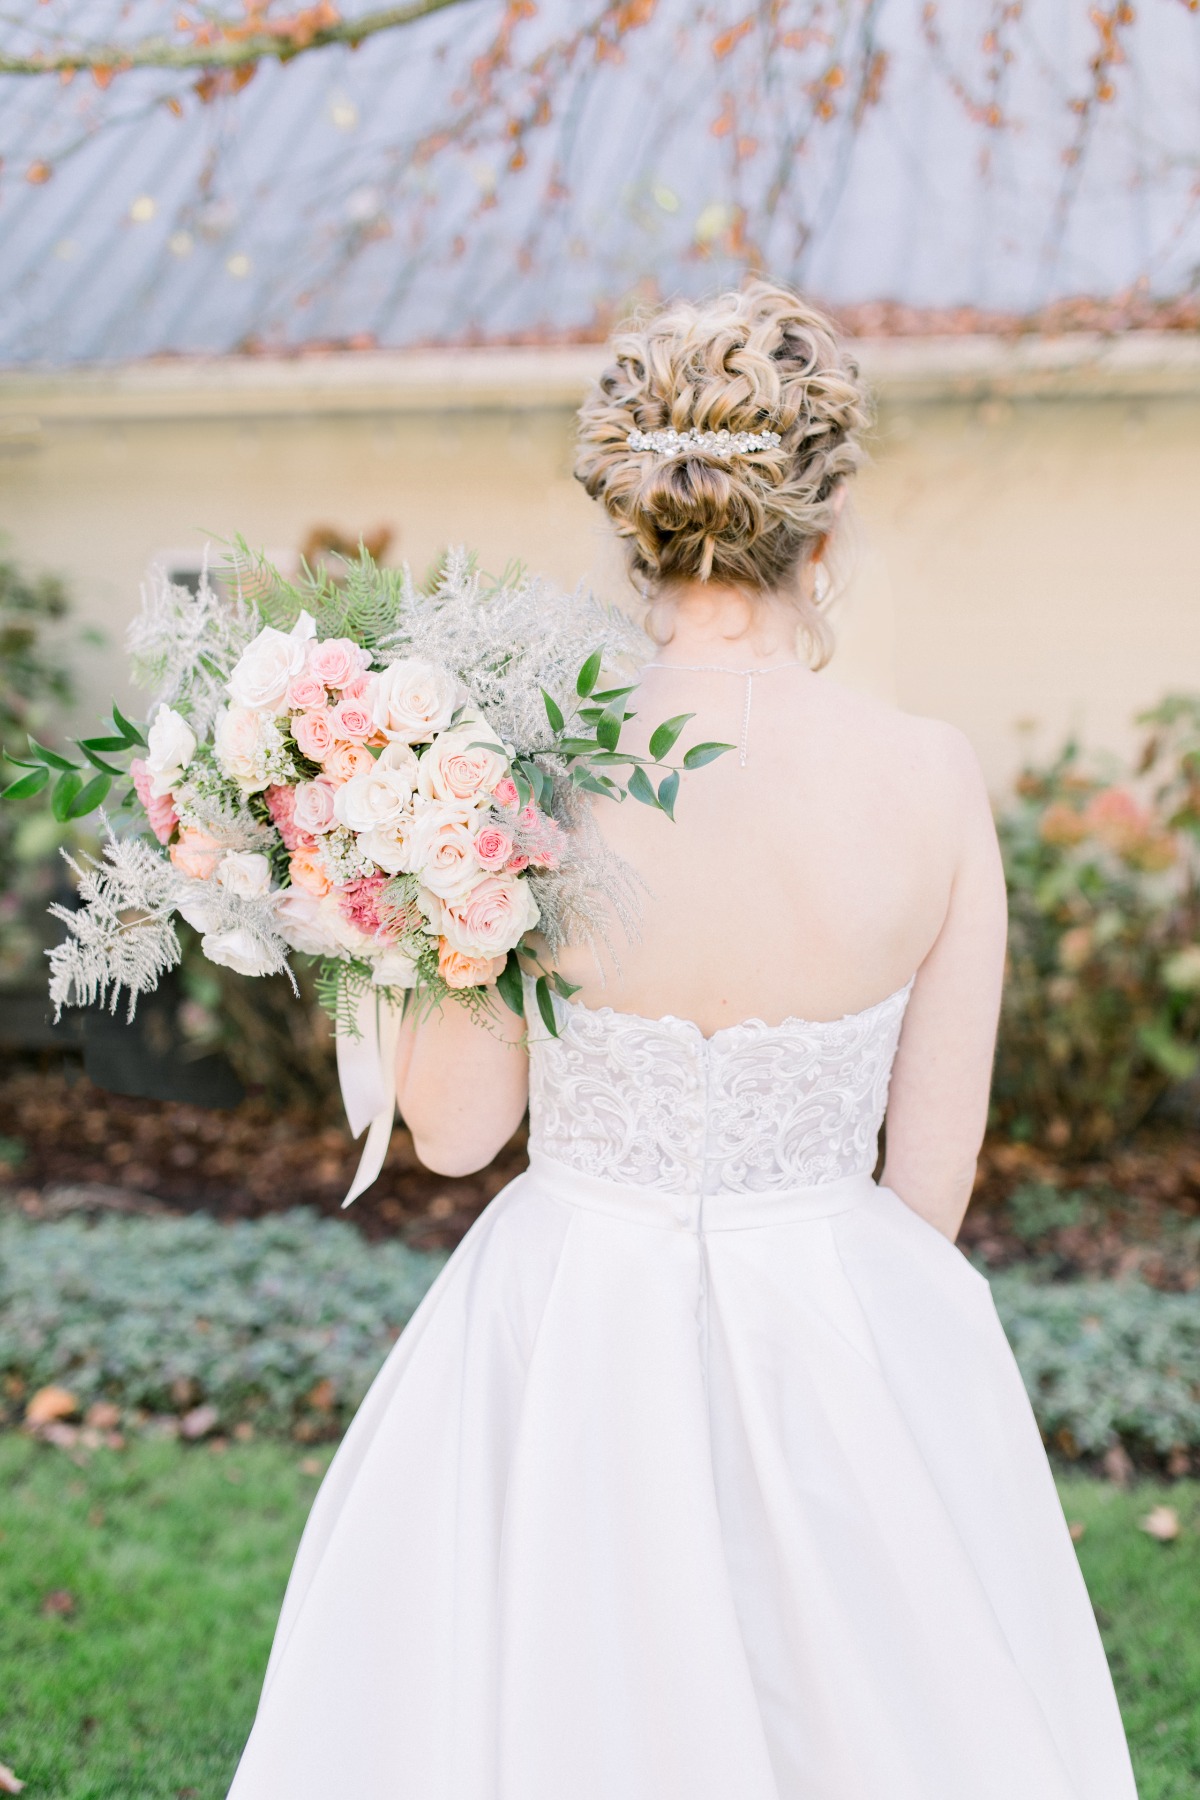 Bridal hair updo and wedding bouquet